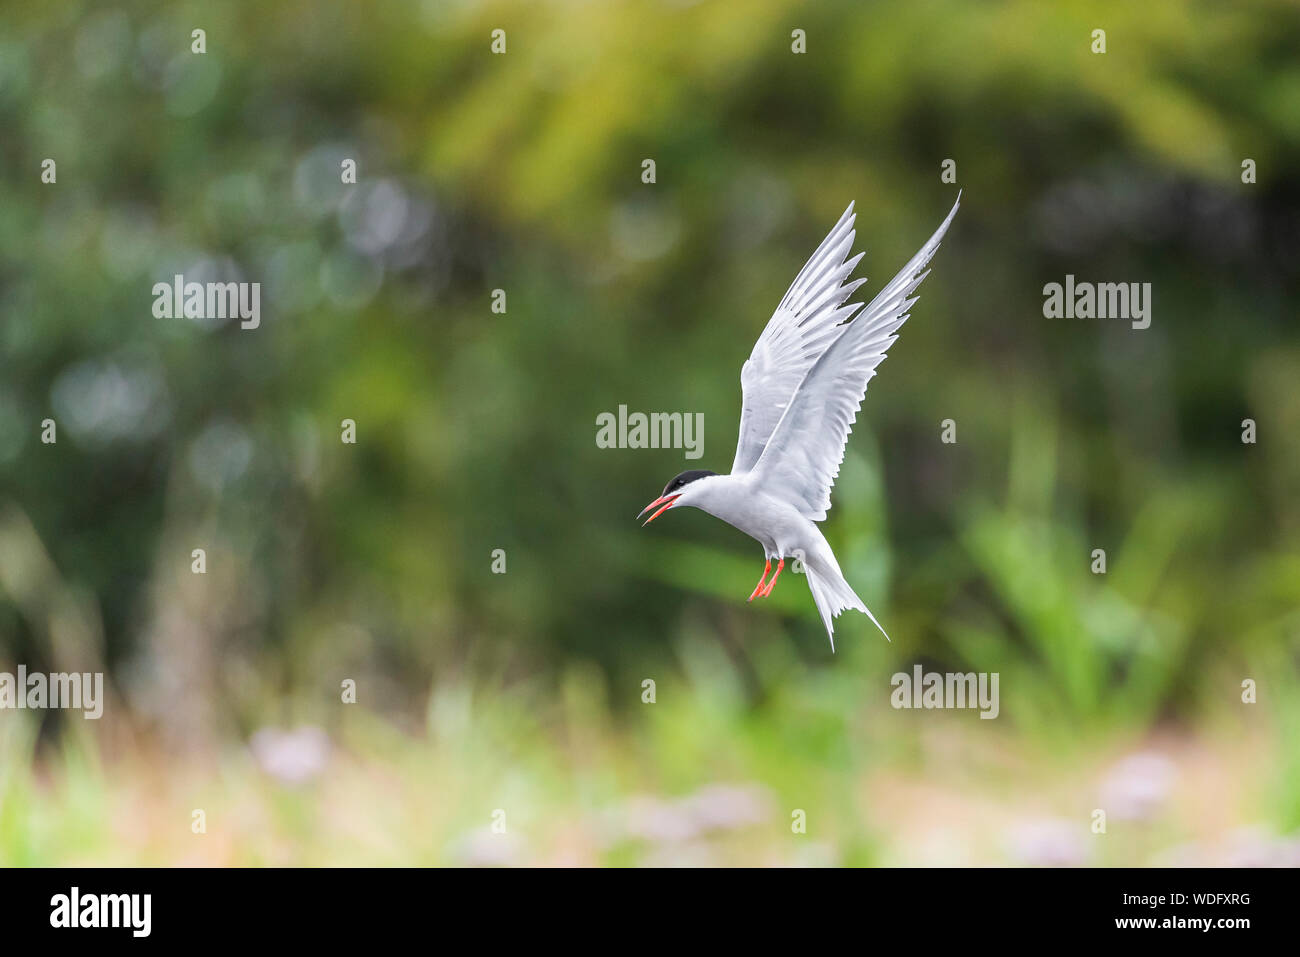 Common Tern, Sterna hirundo, at Greenwich Ecology park, upright wings, coming in to land. Stock Photo